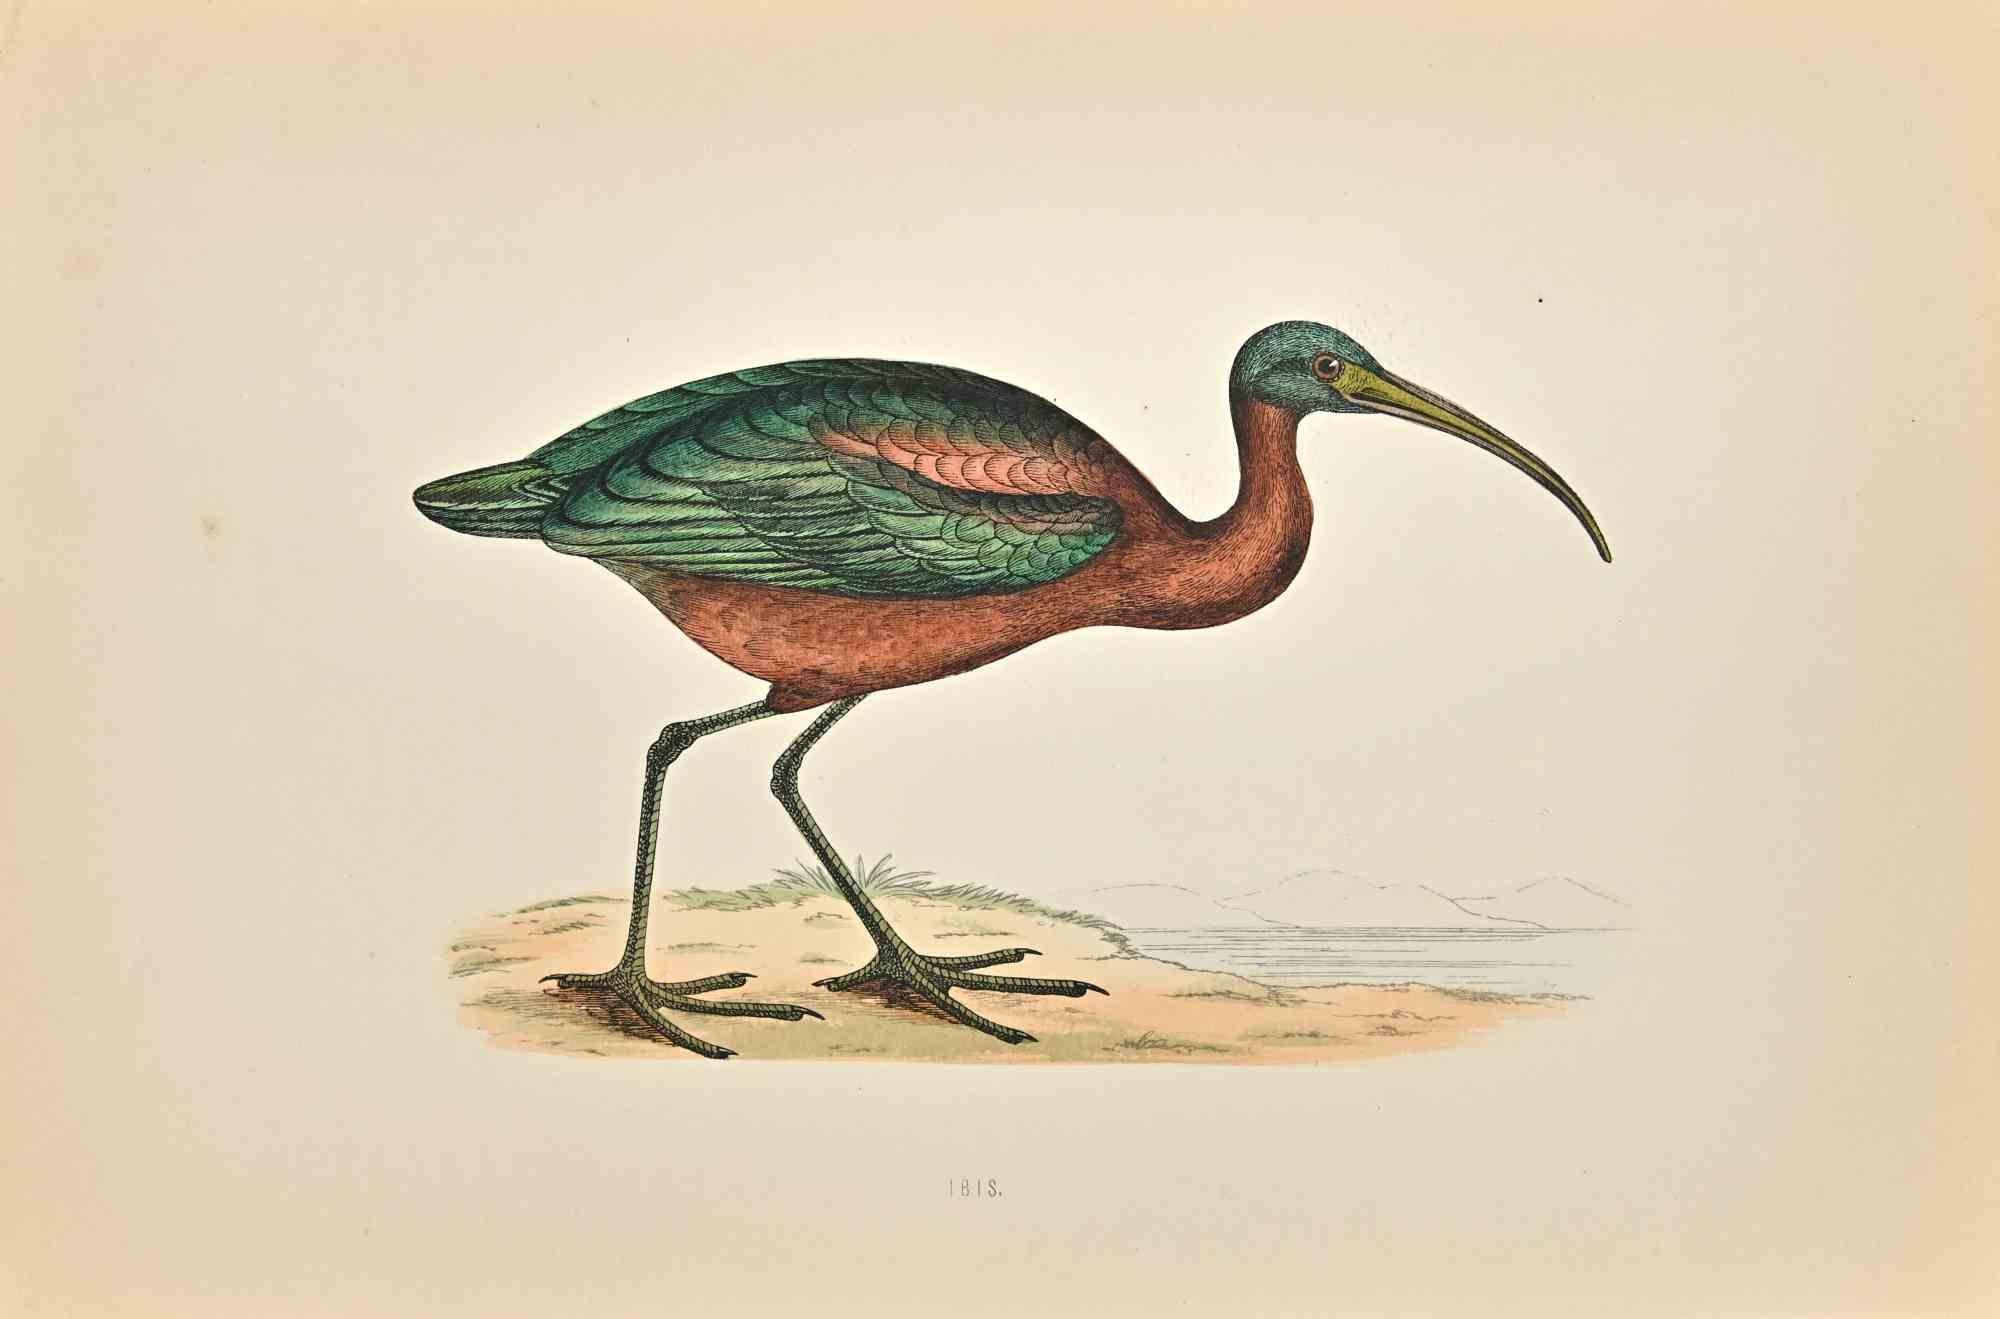 Ibis is a modern artwork realized in 1870 by the British artist Alexander Francis Lydon (1836-1917).

Woodcut print on ivory-colored paper.

Hand-colored, published by London, Bell & Sons, 1870.  

The name of the bird is printed on the plate. This